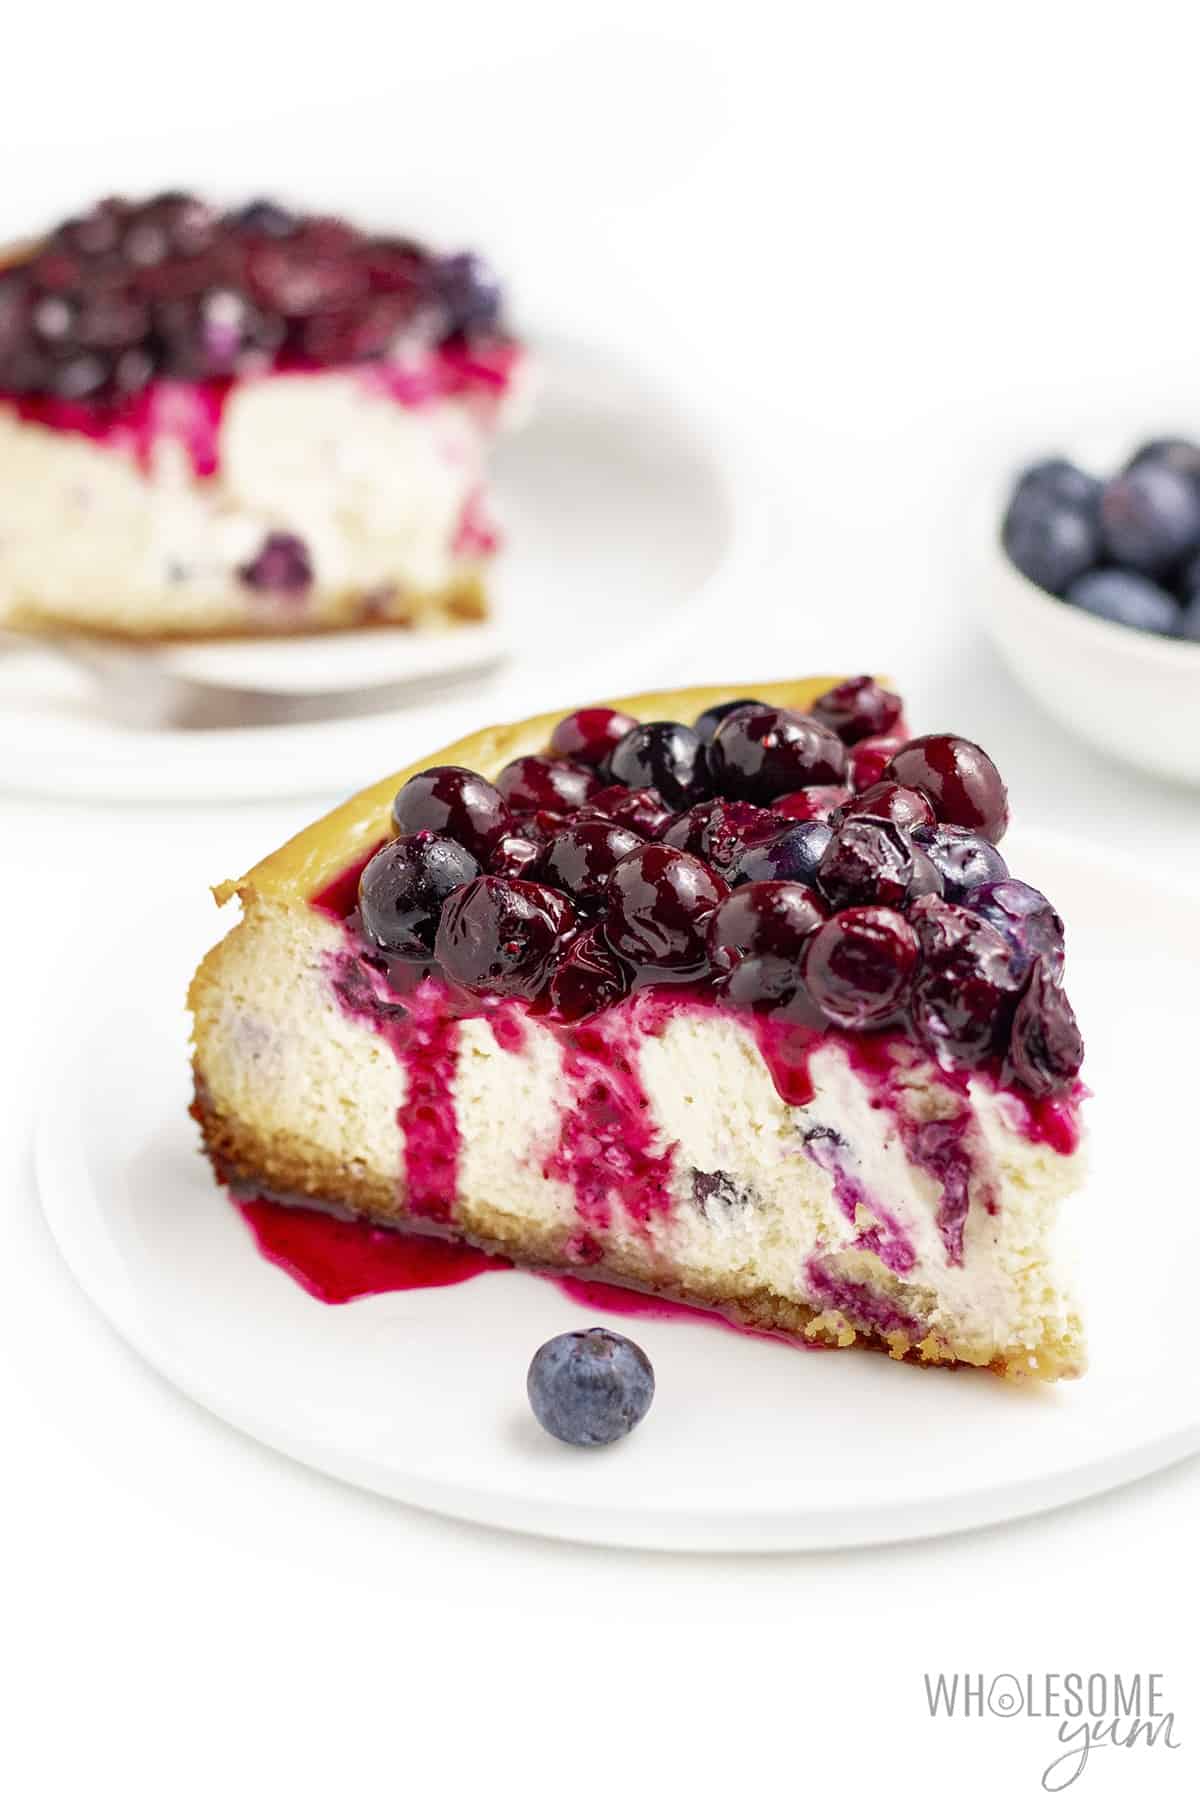 Slice of keto blueberry cheesecake on a plate with full cake in the background.